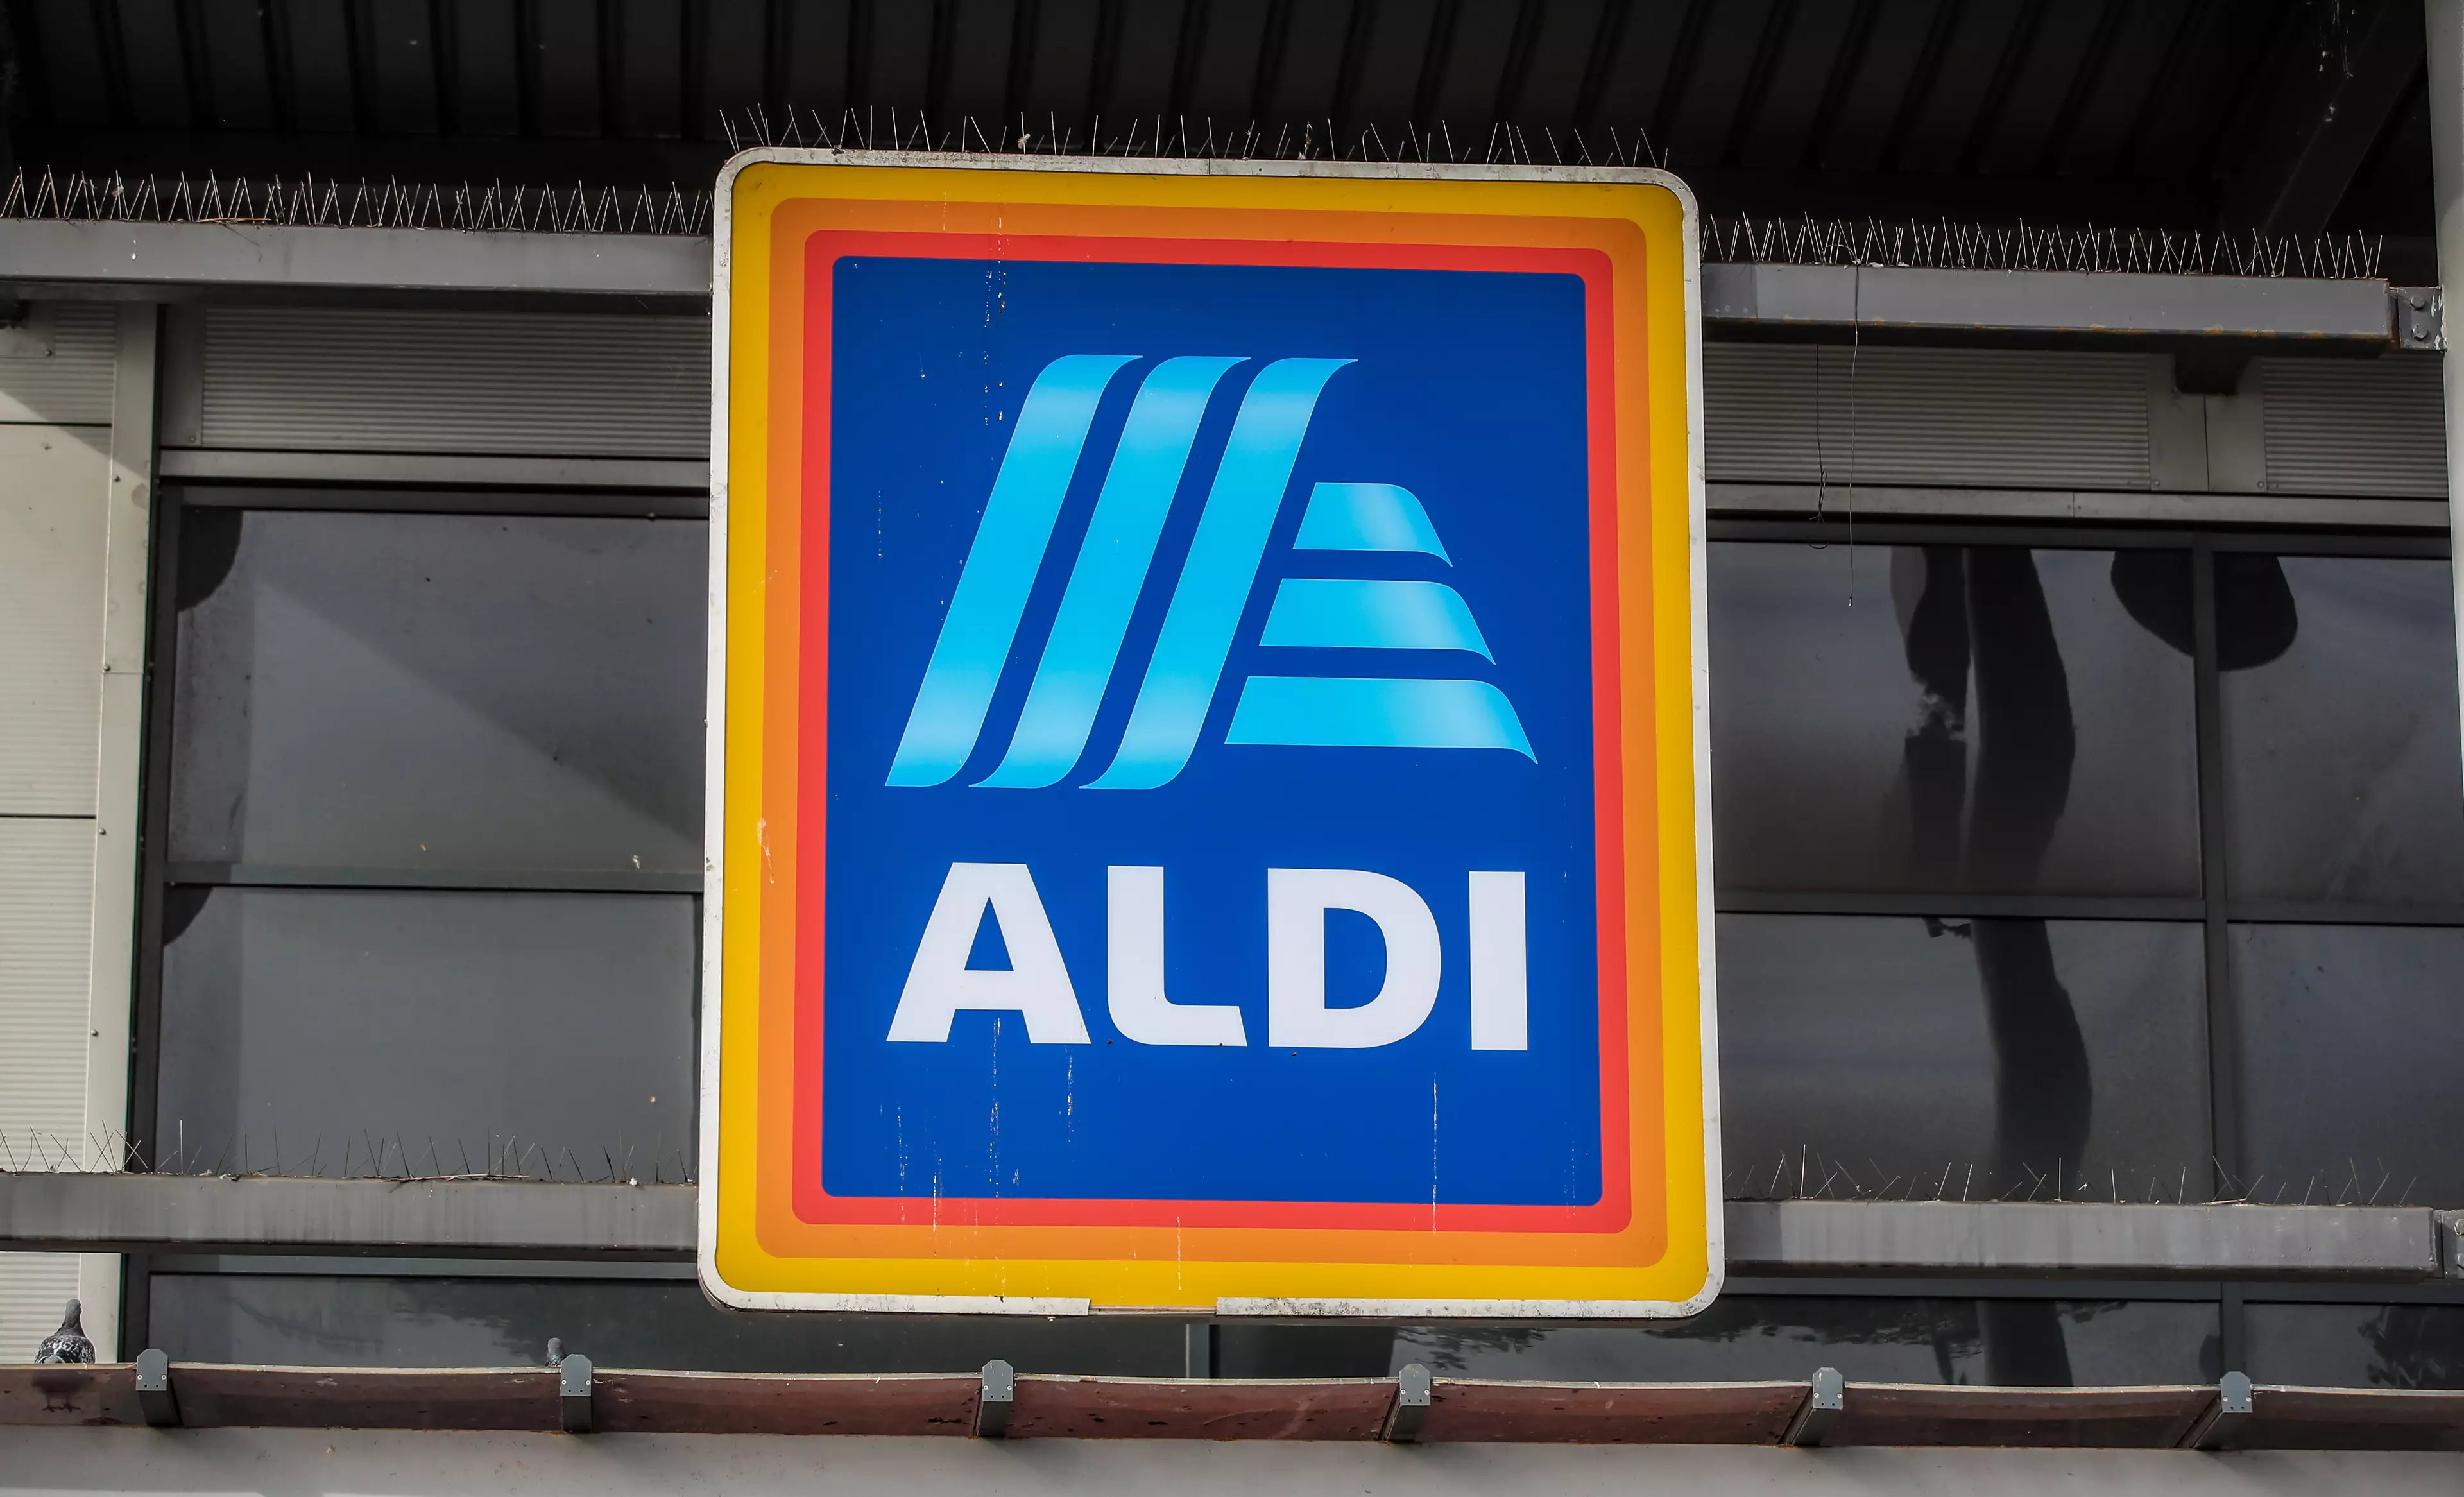 Aldi has installed a new traffic light system by the doors that will tell customers when they can safely enter.